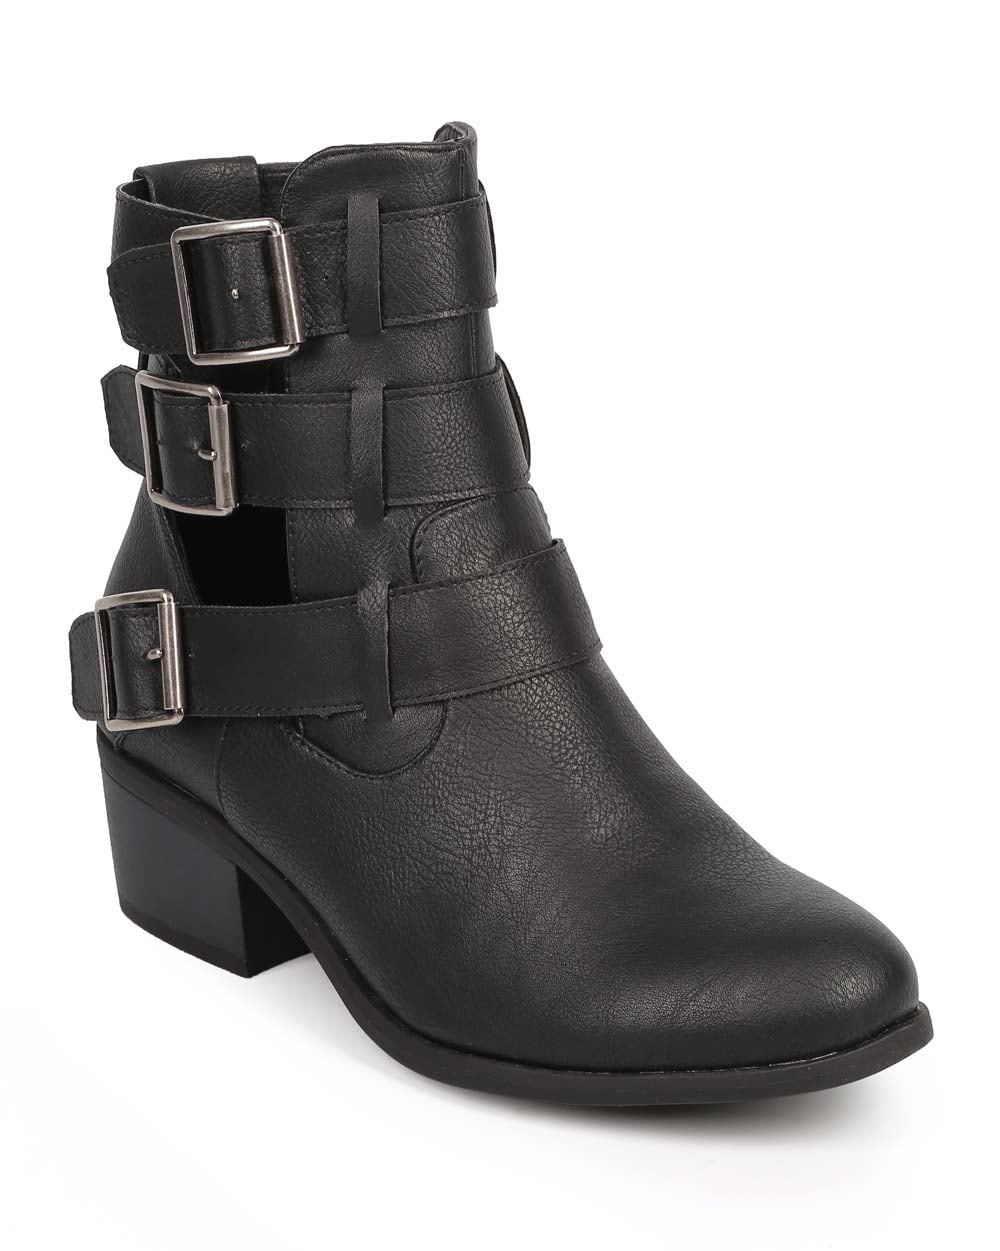 Pamee01 Caged Multi Buckle Faux Wooden Heel Western Ankle Boots 